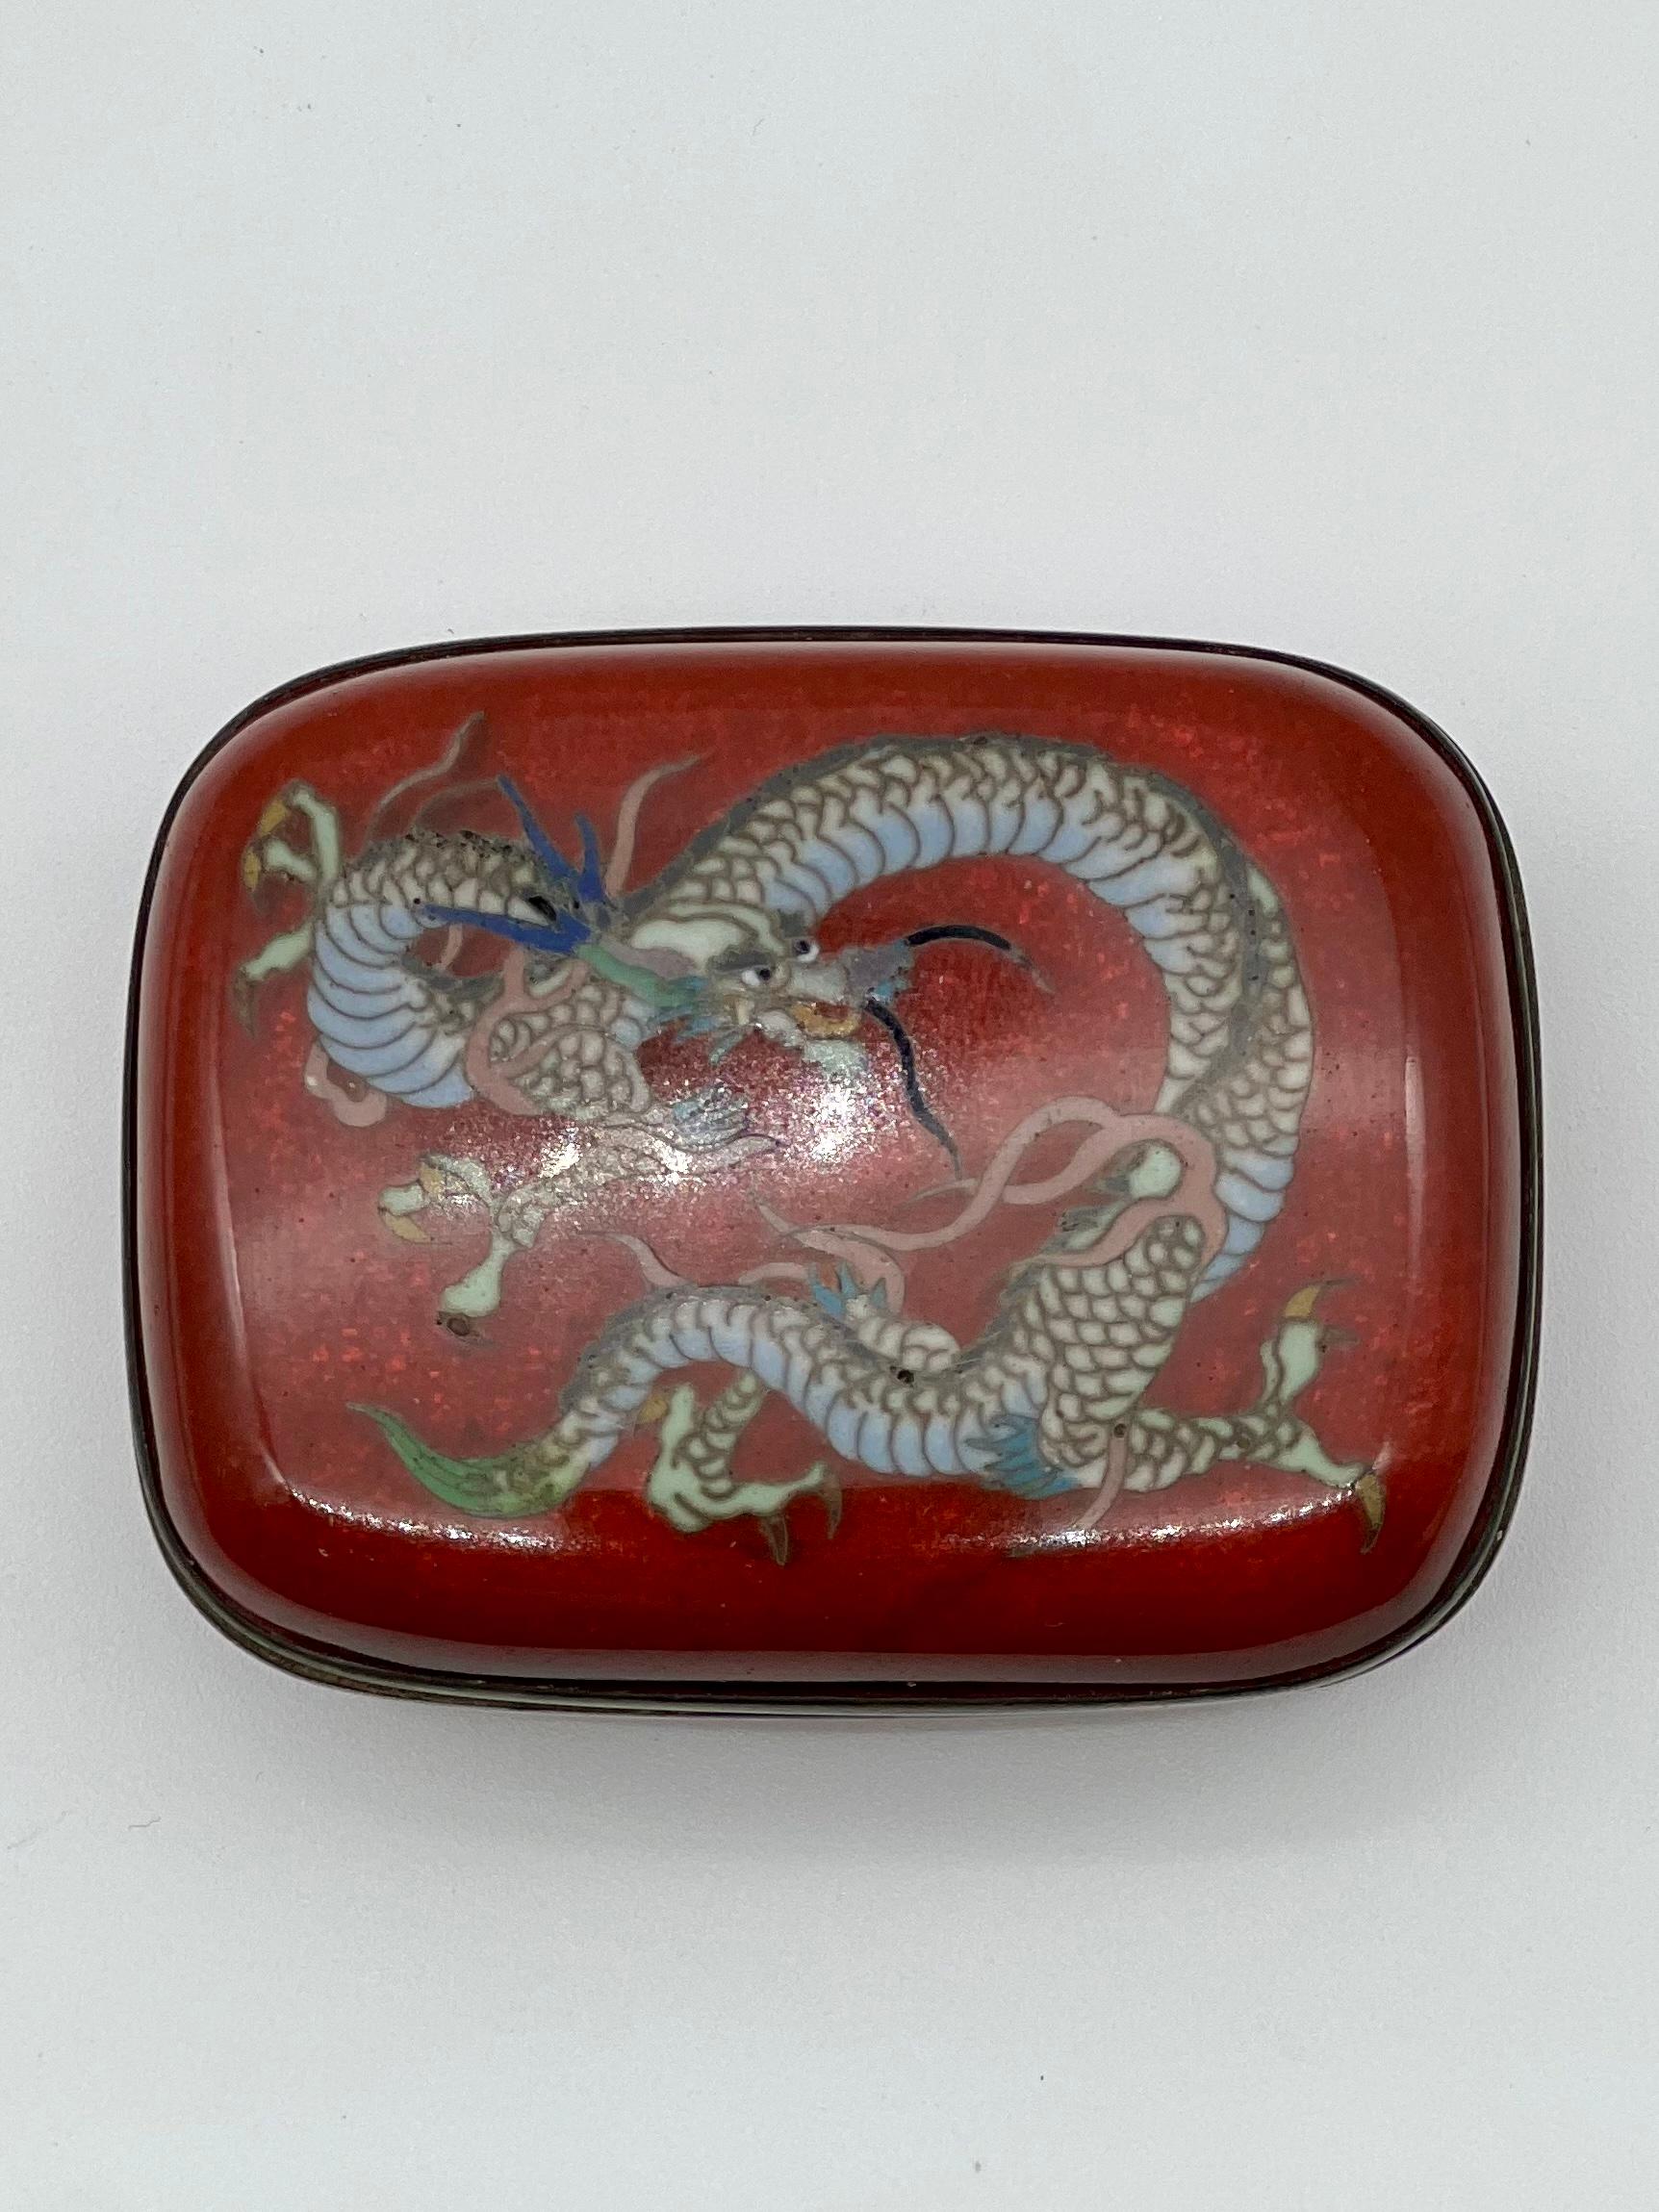 Exquisite Japanese Cloisonne Enamel Box and Cover. 19th C For Sale 12